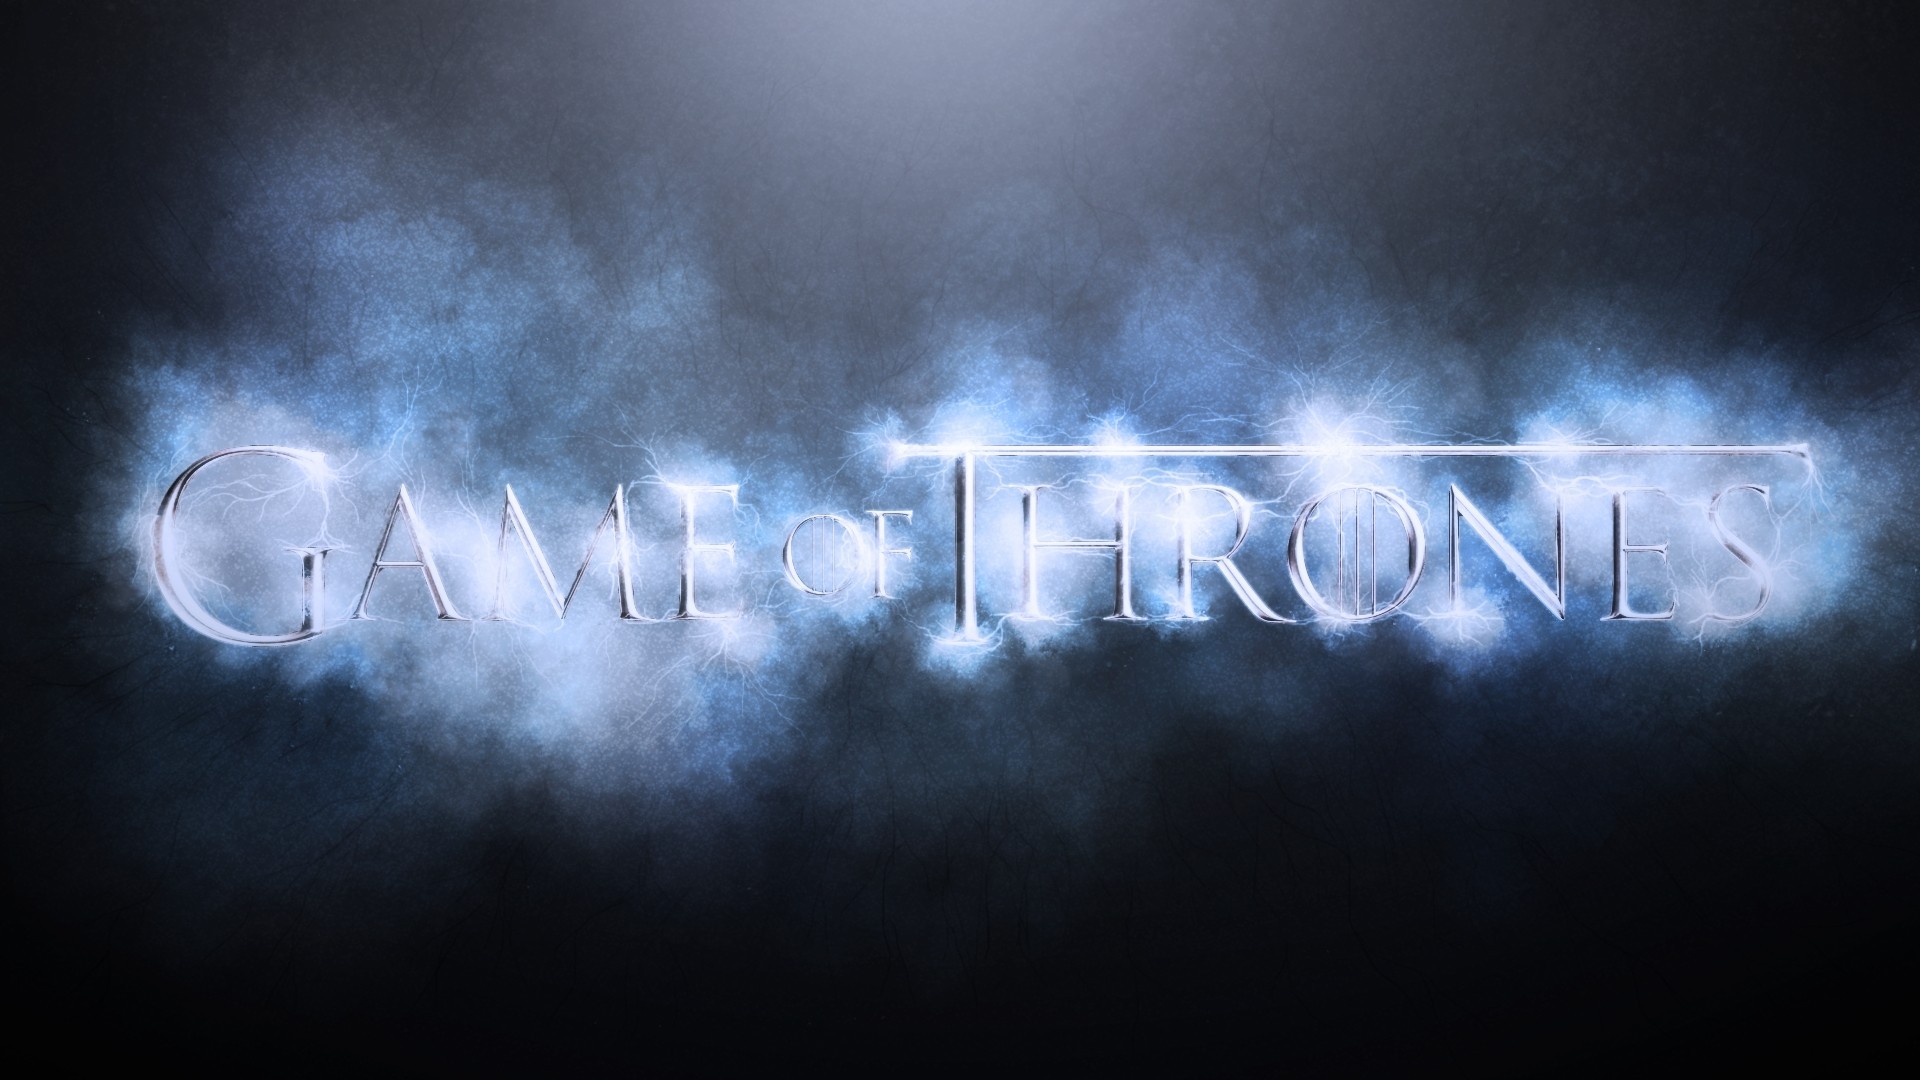 Game Of Thrones Wallpaper